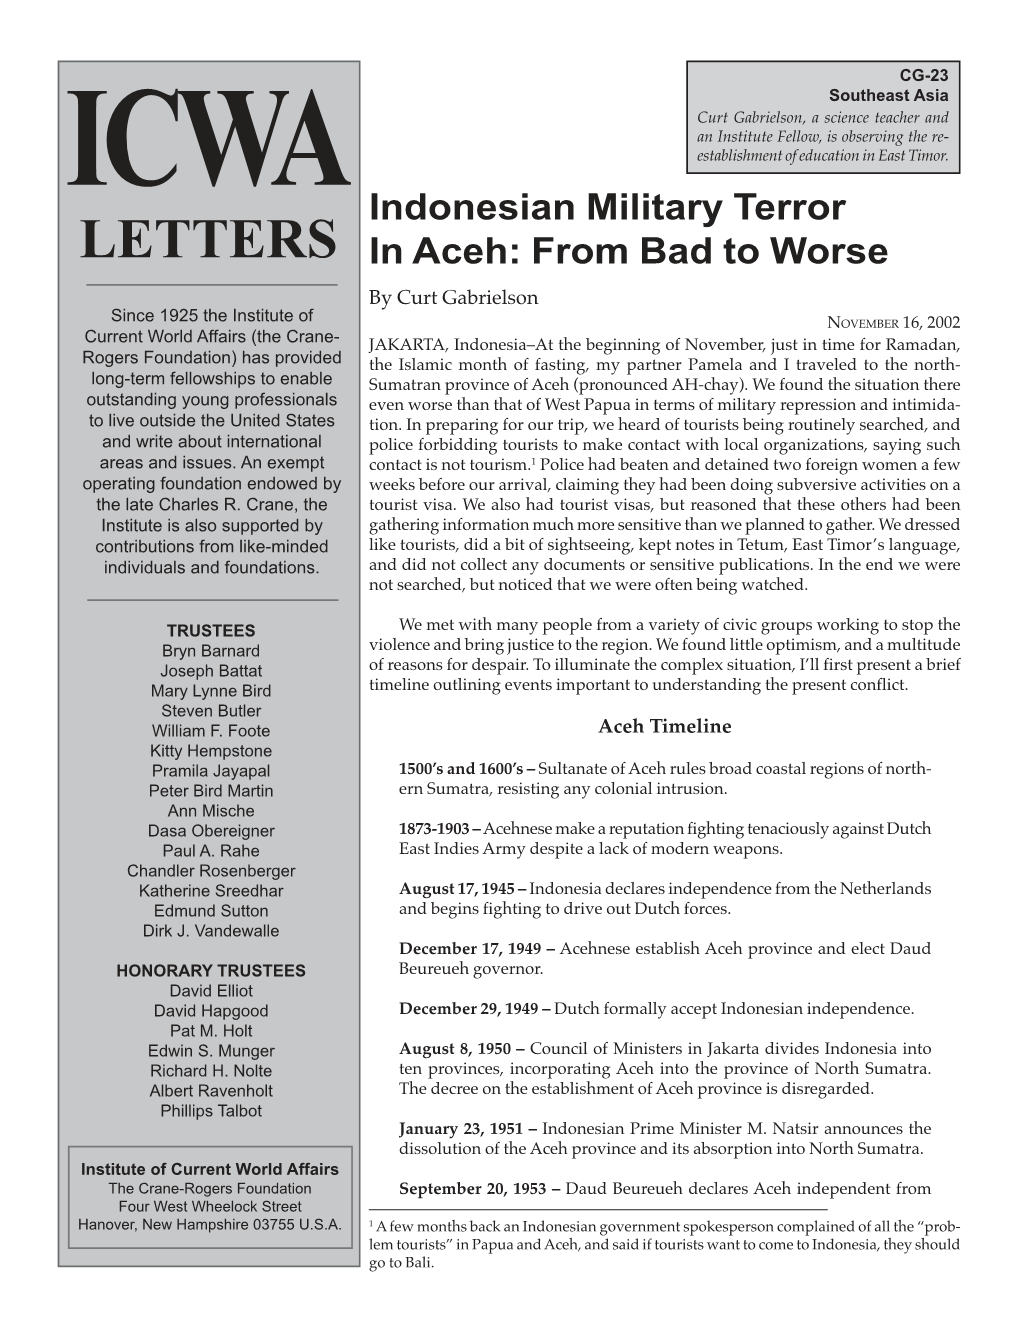 Indonesian Military Terror in Aceh